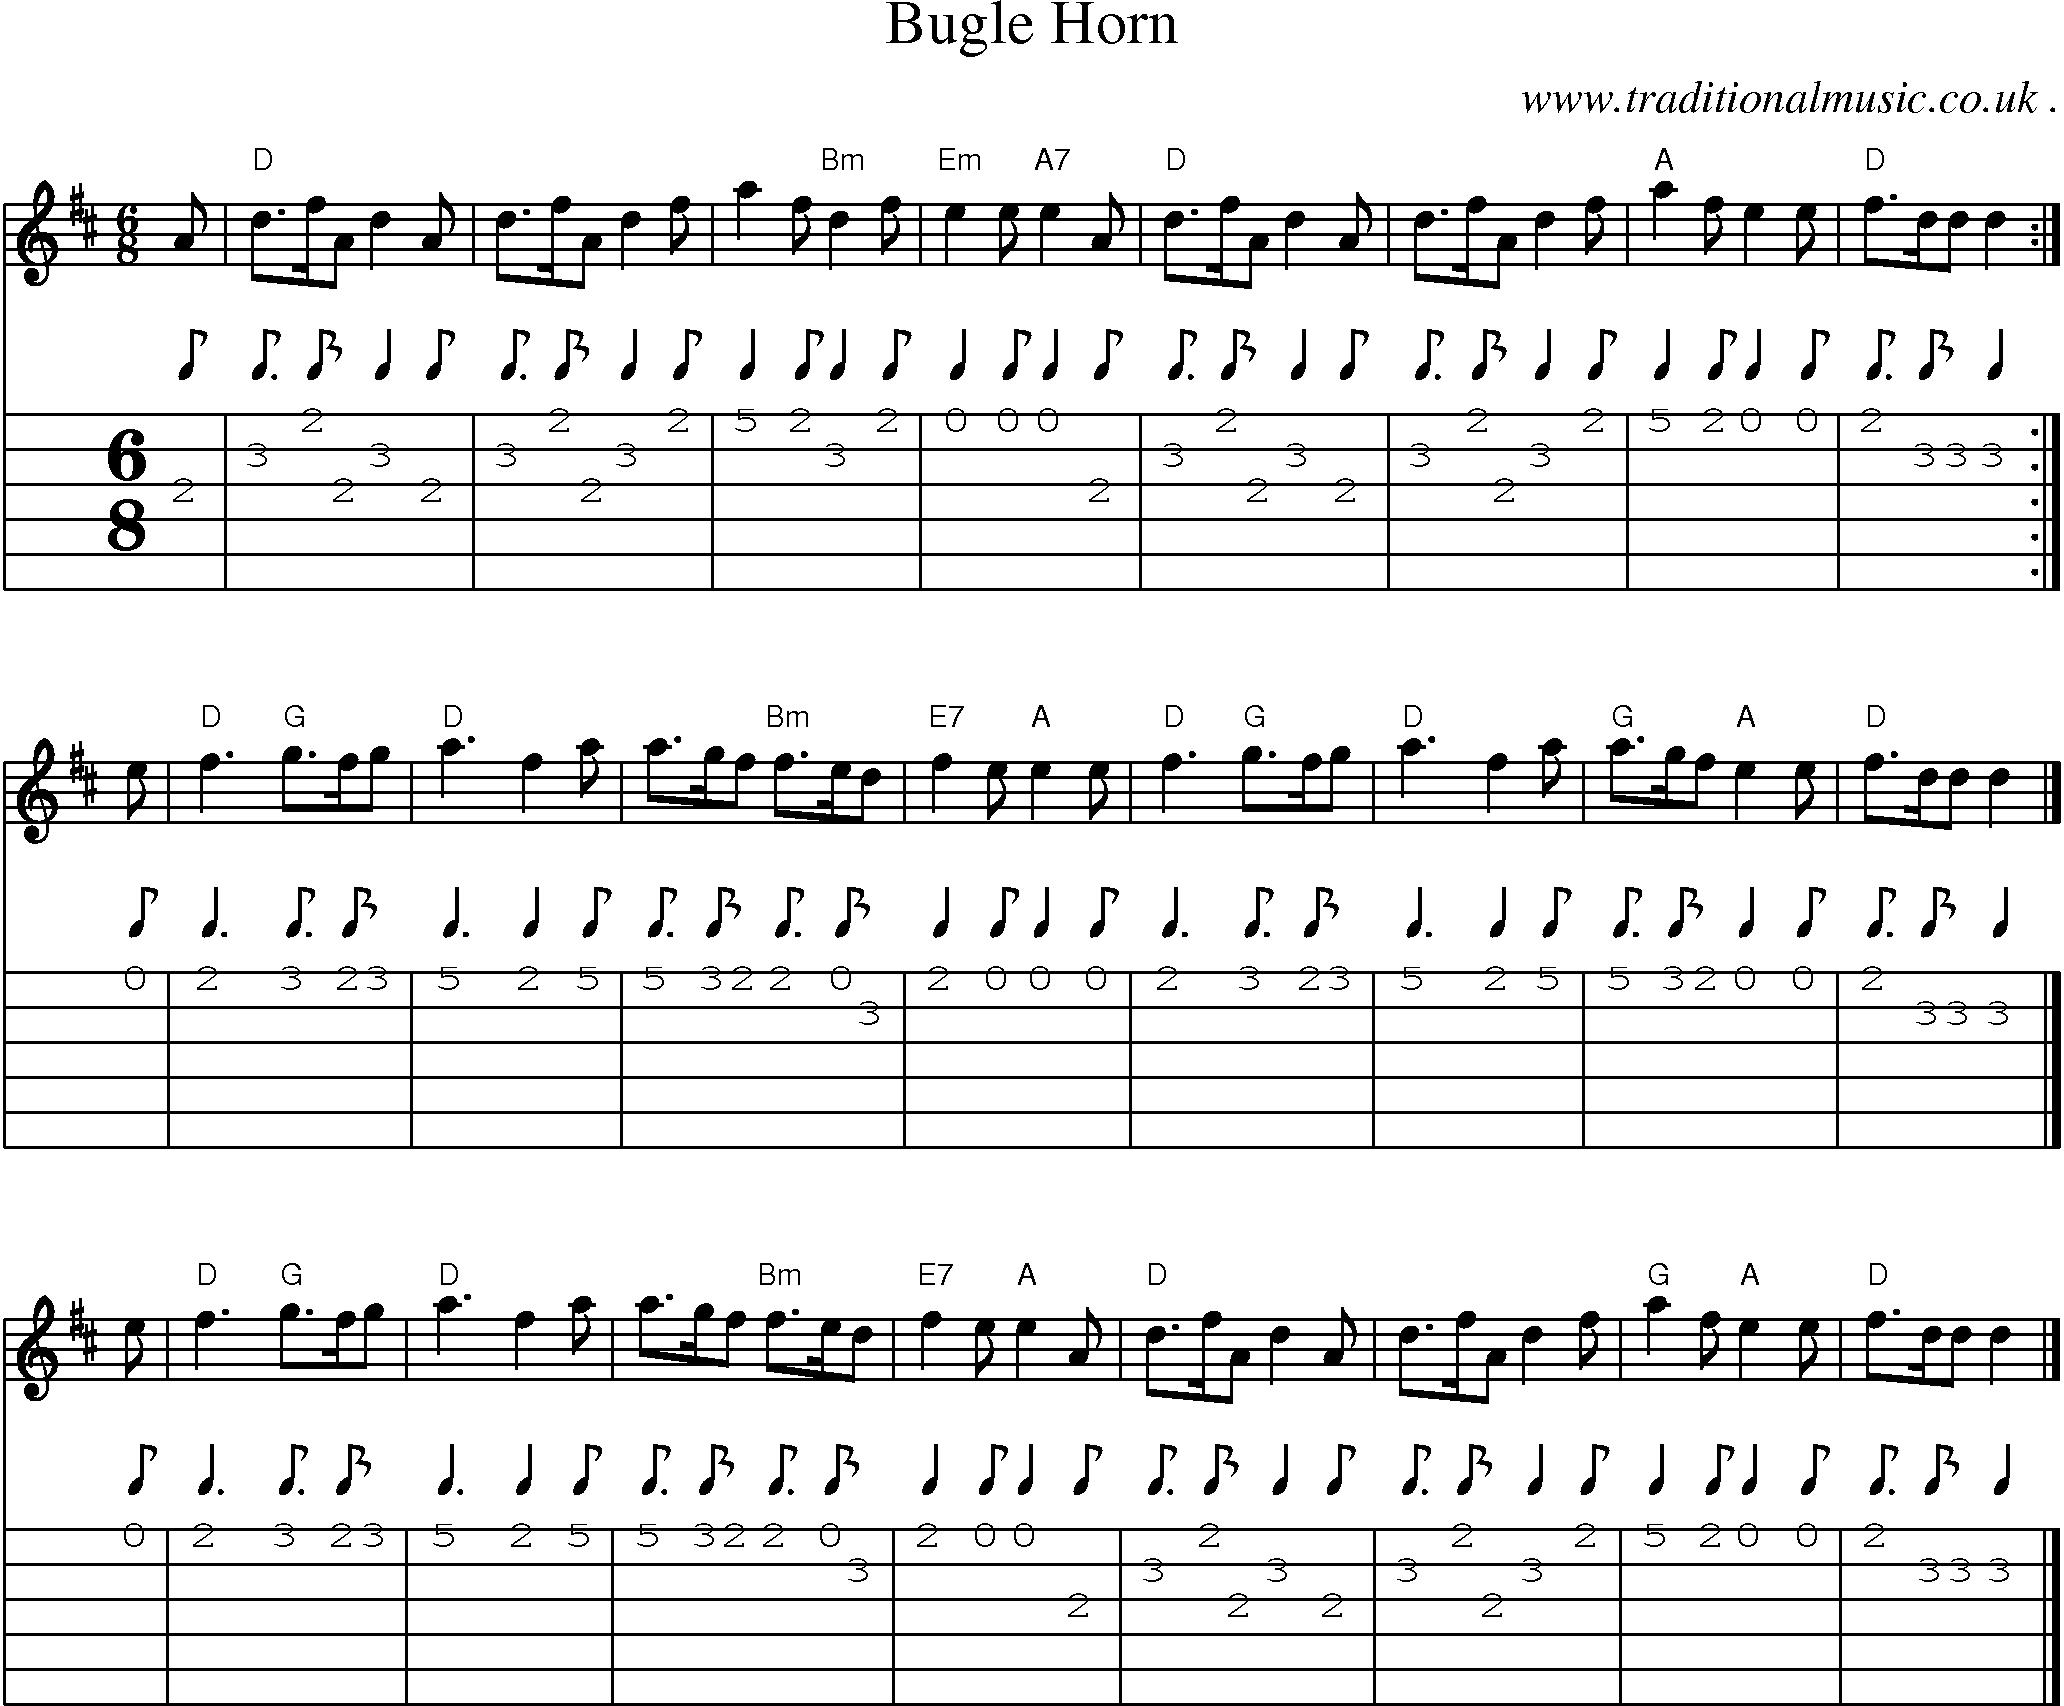 Sheet-music  score, Chords and Guitar Tabs for Bugle Horn